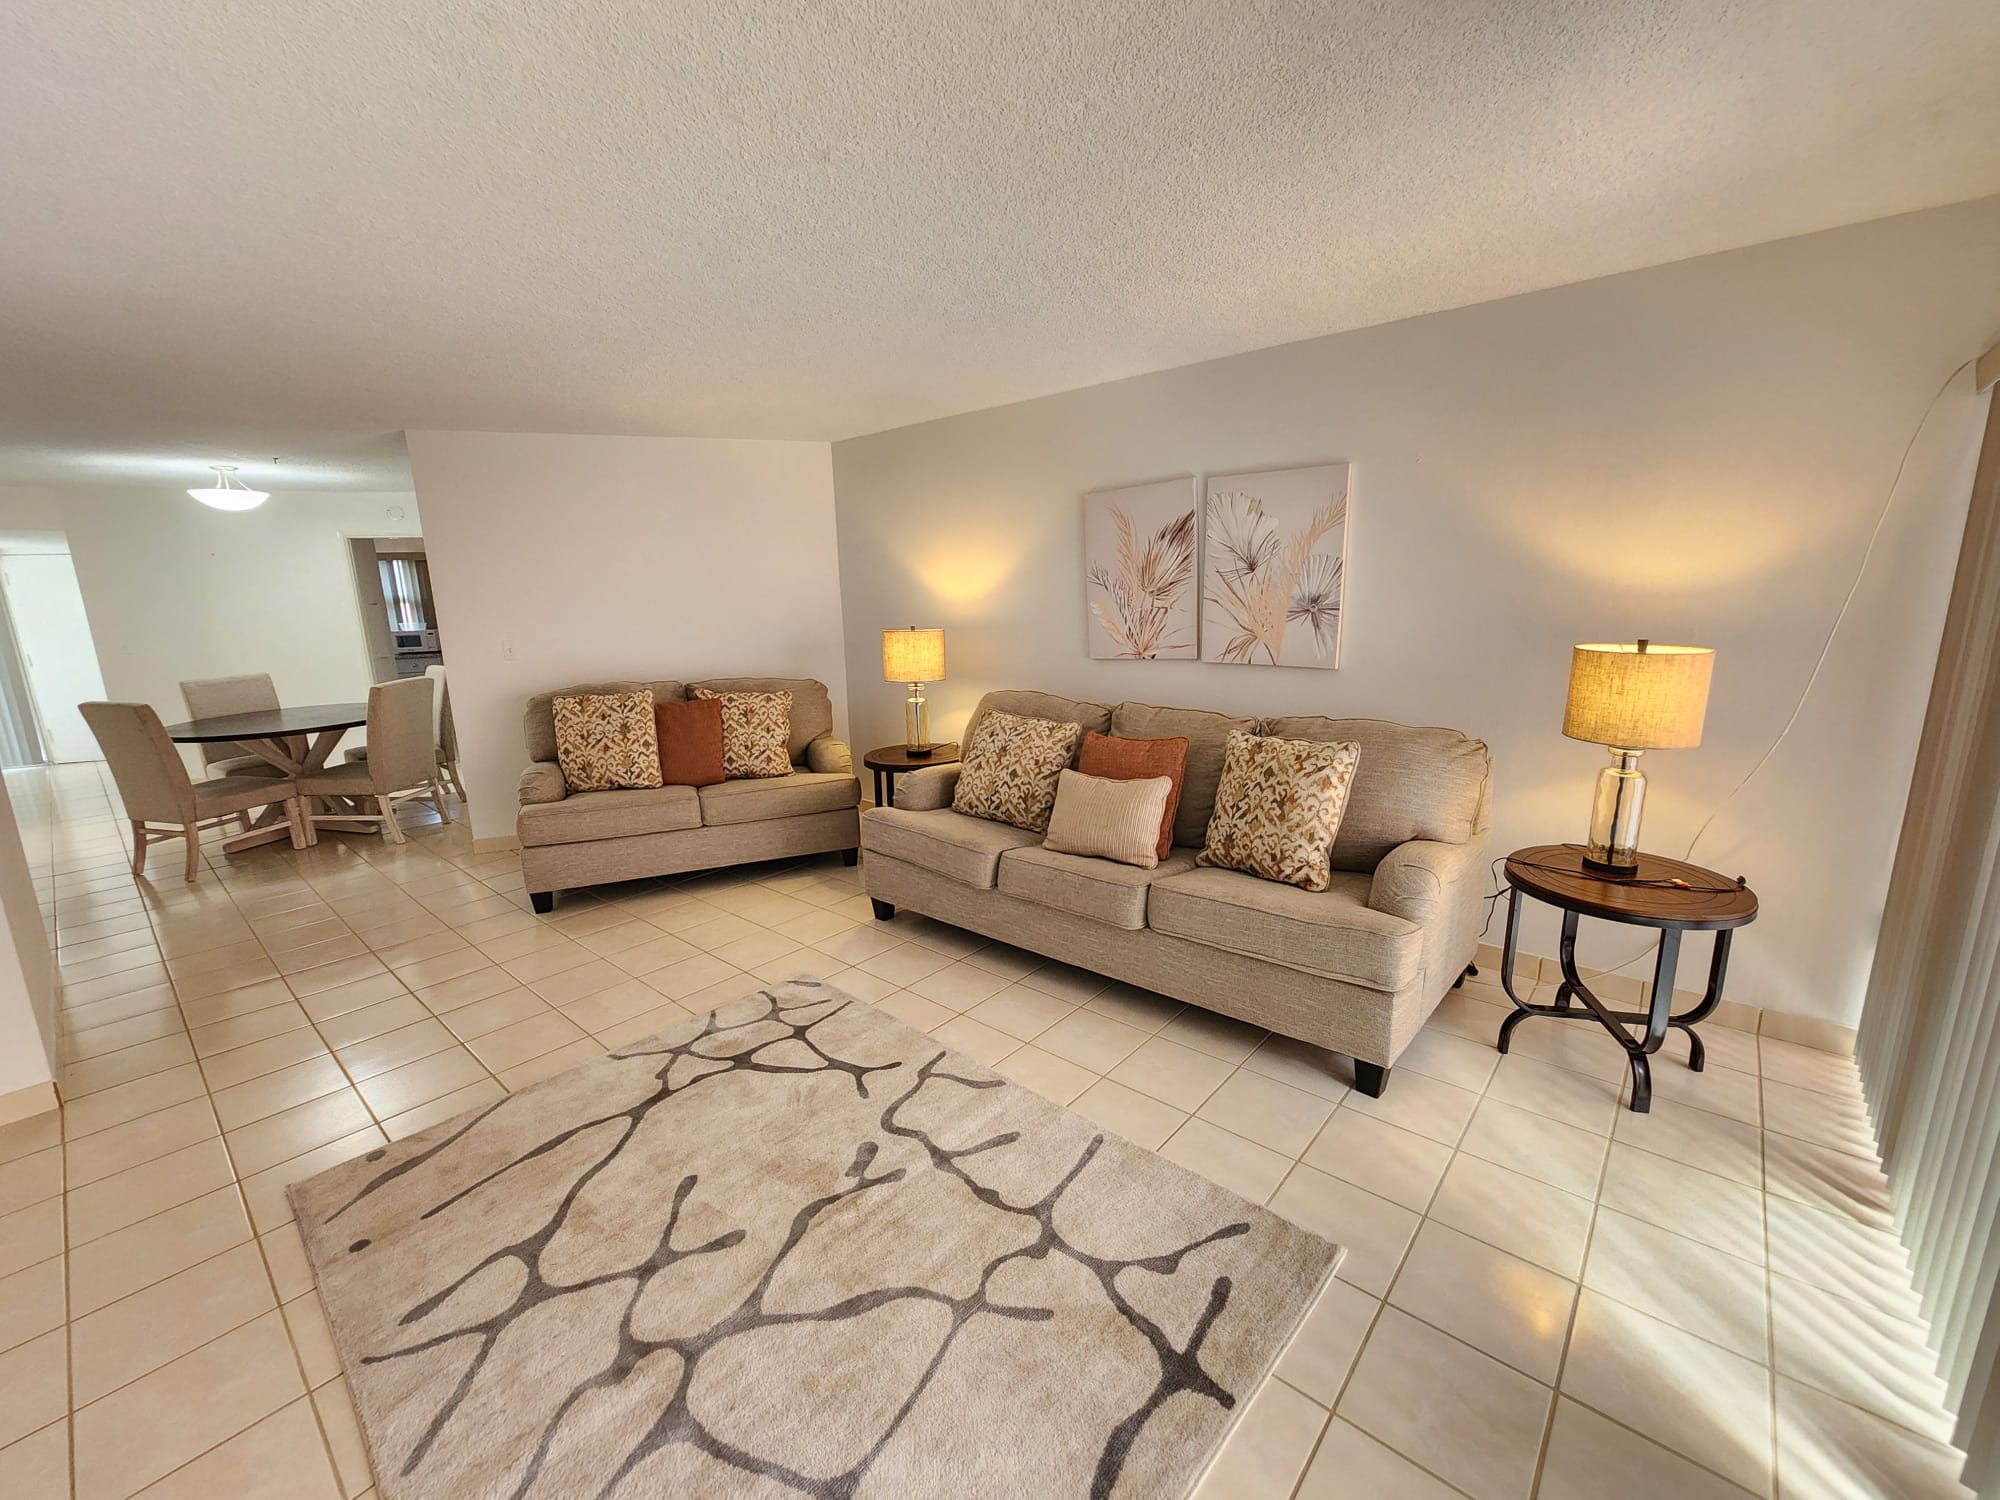 Chertsey 2br Condo, Listing #2056  RENTED